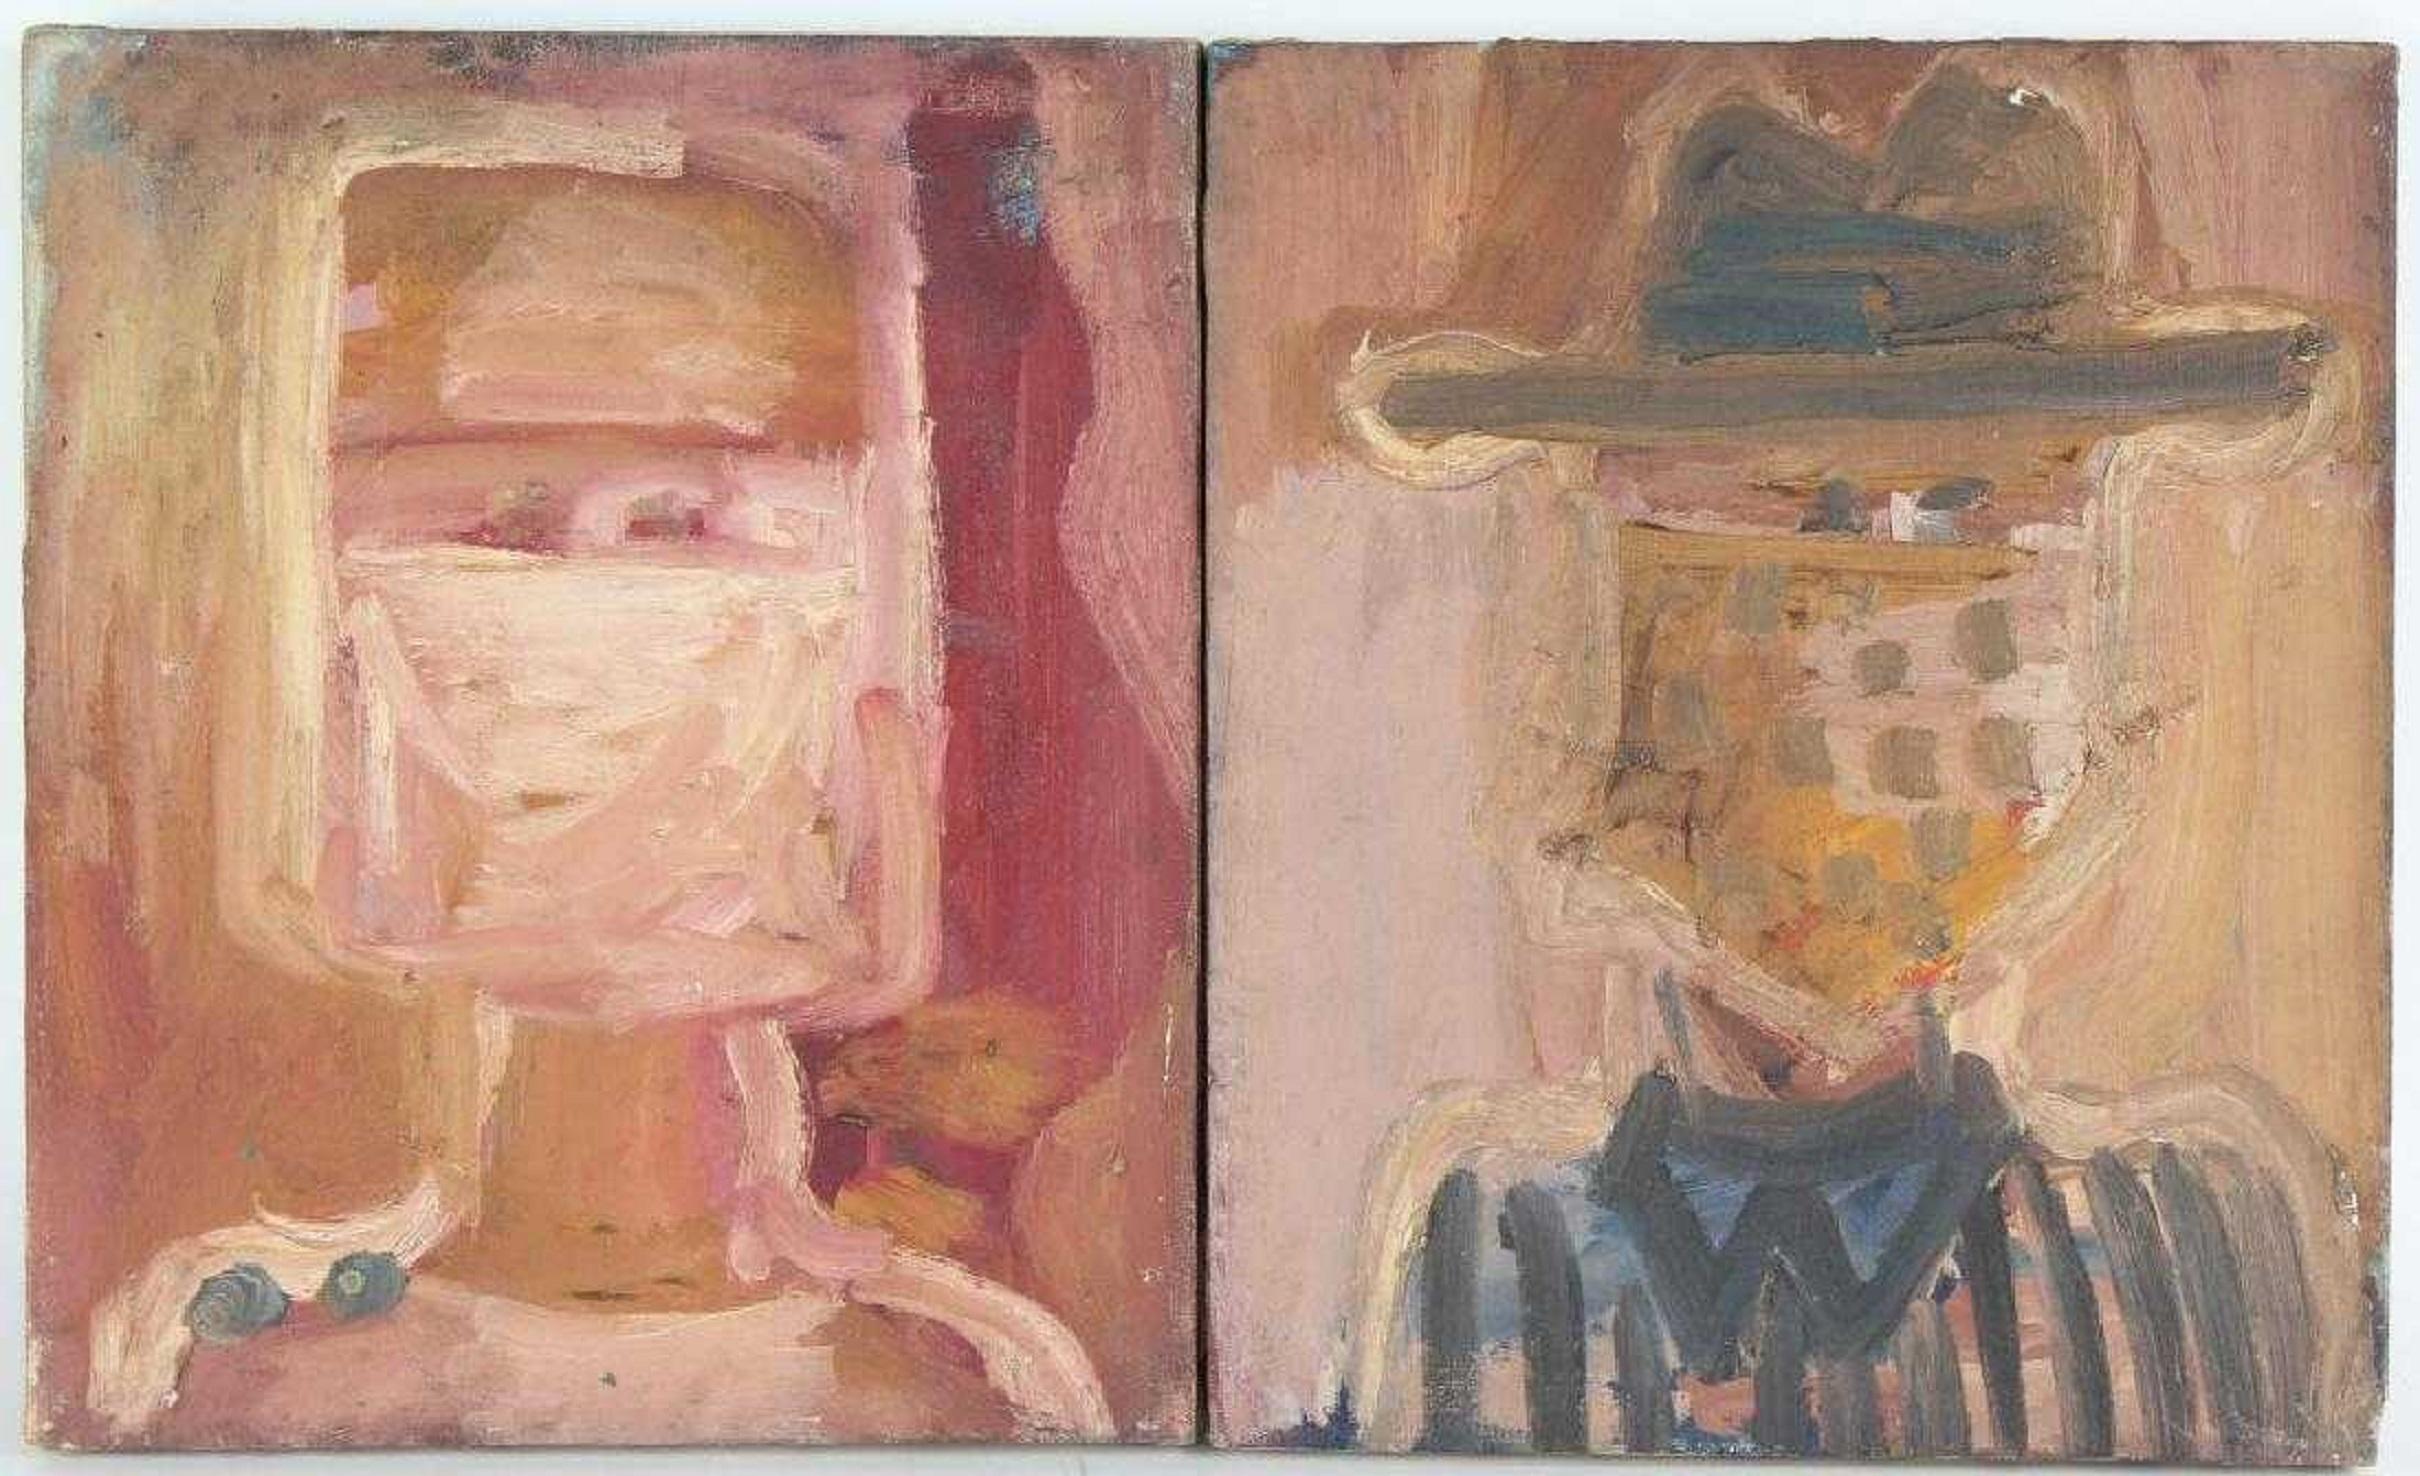 Abstract Expressionist Pop Art Oil Painting Cowboy Figure Portrait NYC 1 of 2 1